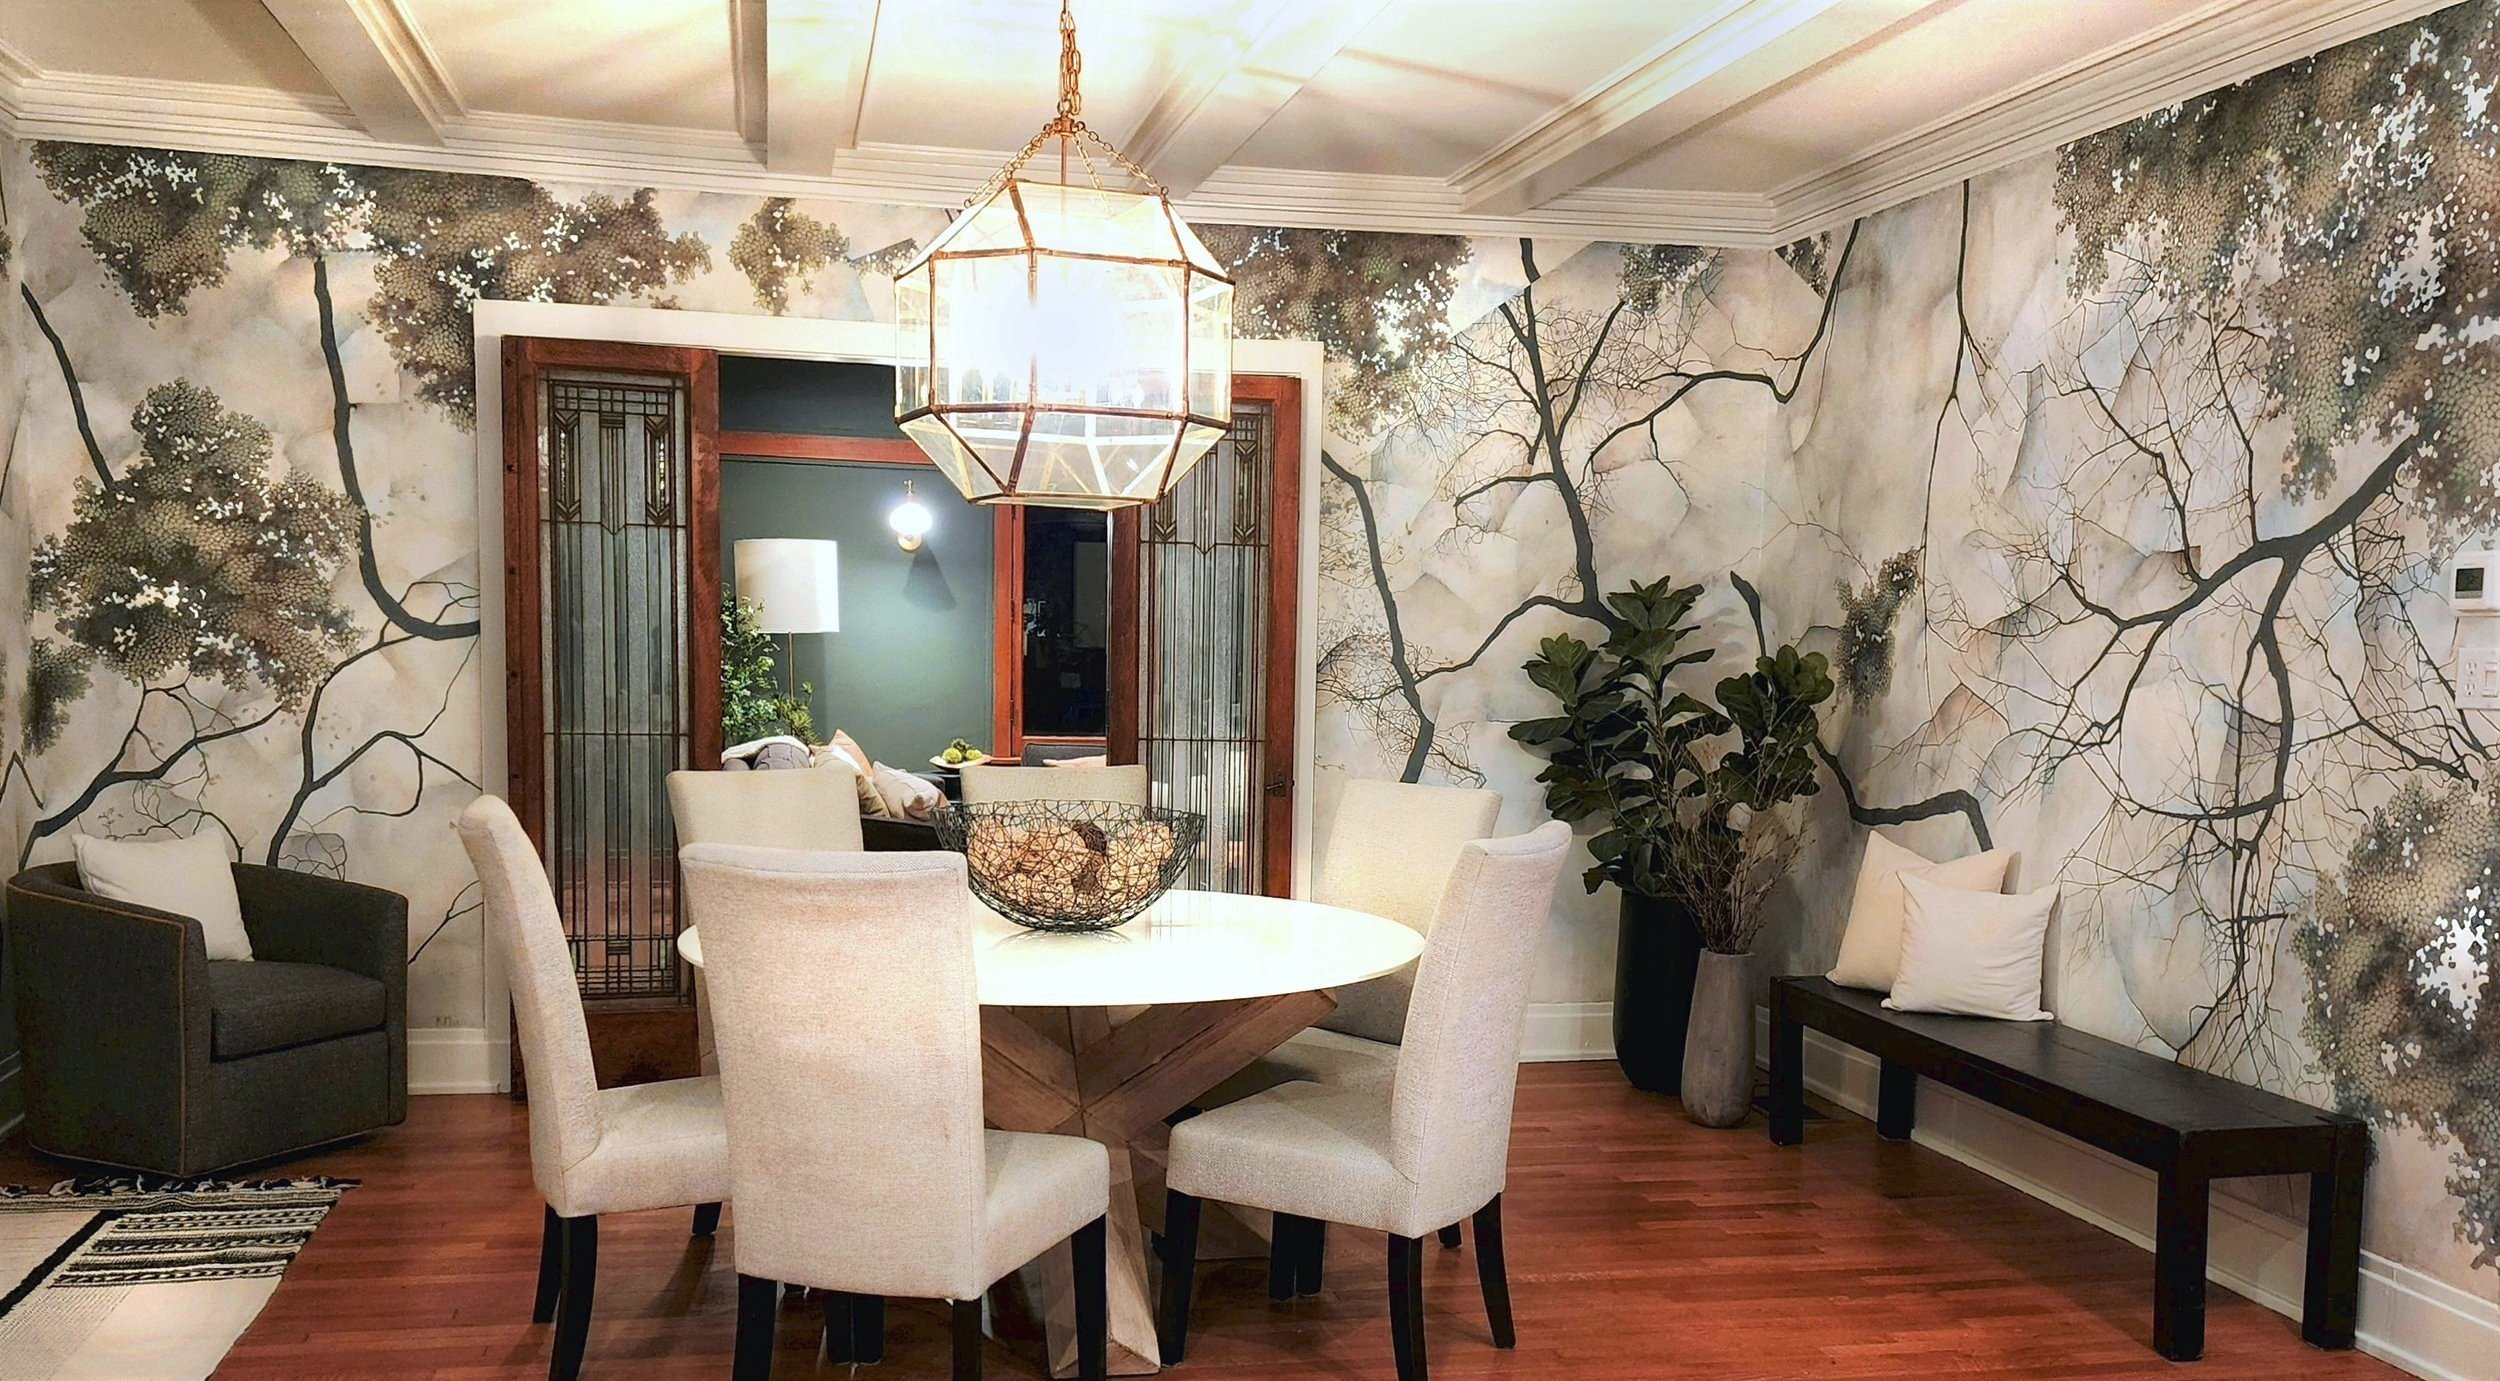  Mural created for HGTV’s  Windy City Rehab  *  This dining room mural, located in a lovely family home in the historic Chicago suburb of Oak Park, Illinois, was the result of several rigorous late-night paint sessions in order to meet the show’s fil